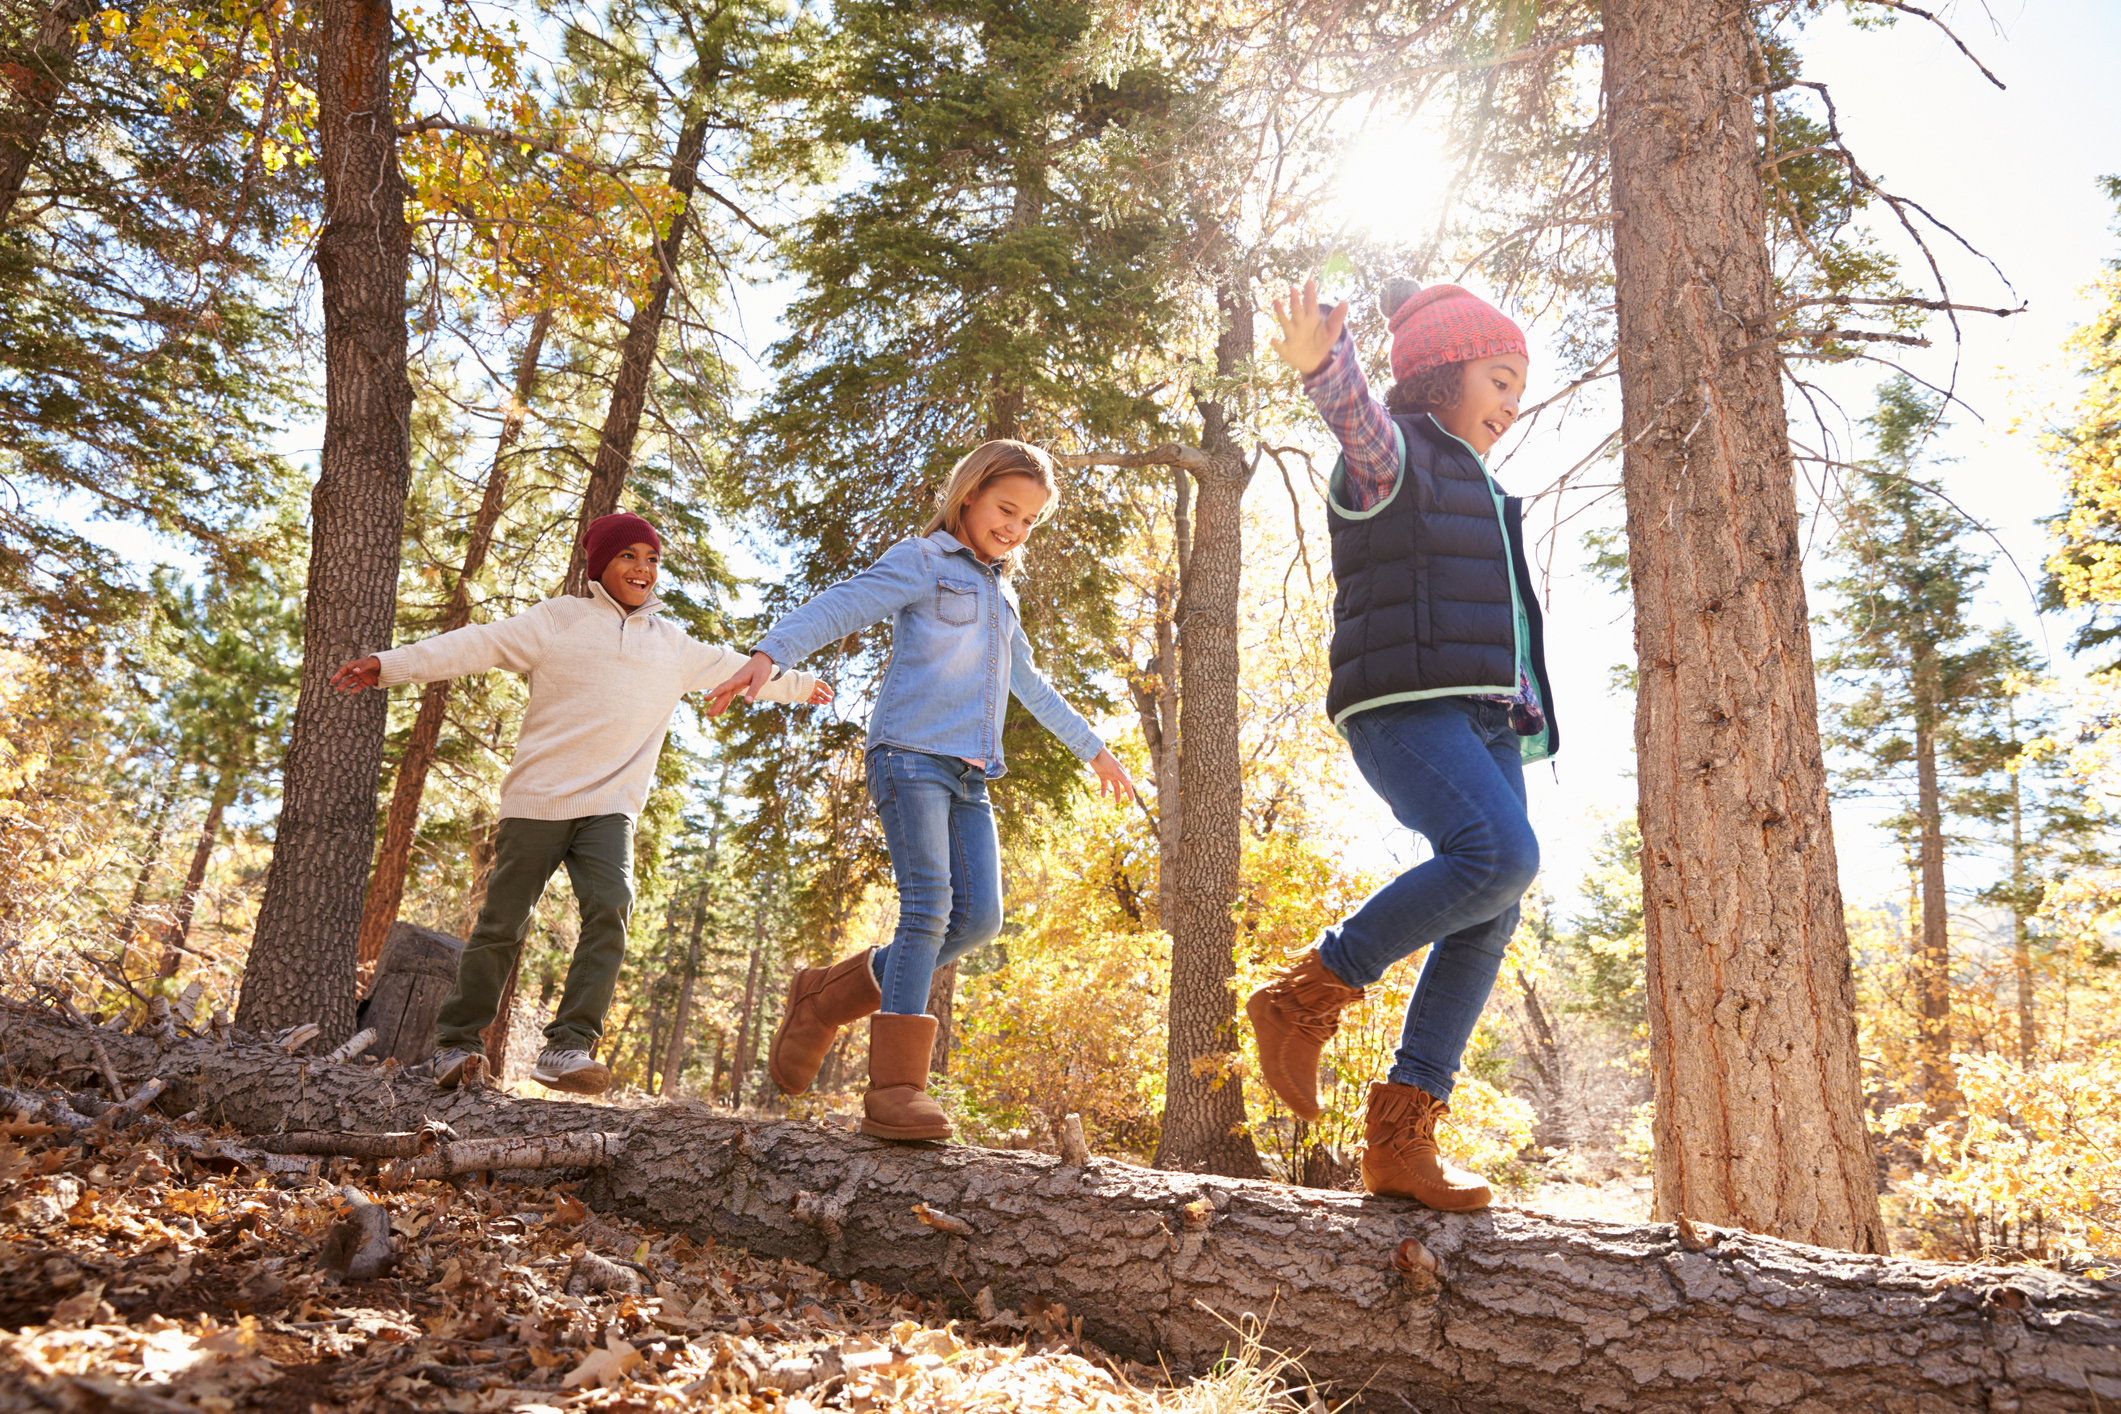 Tips for Keeping Kids Safe During Outdoor Play